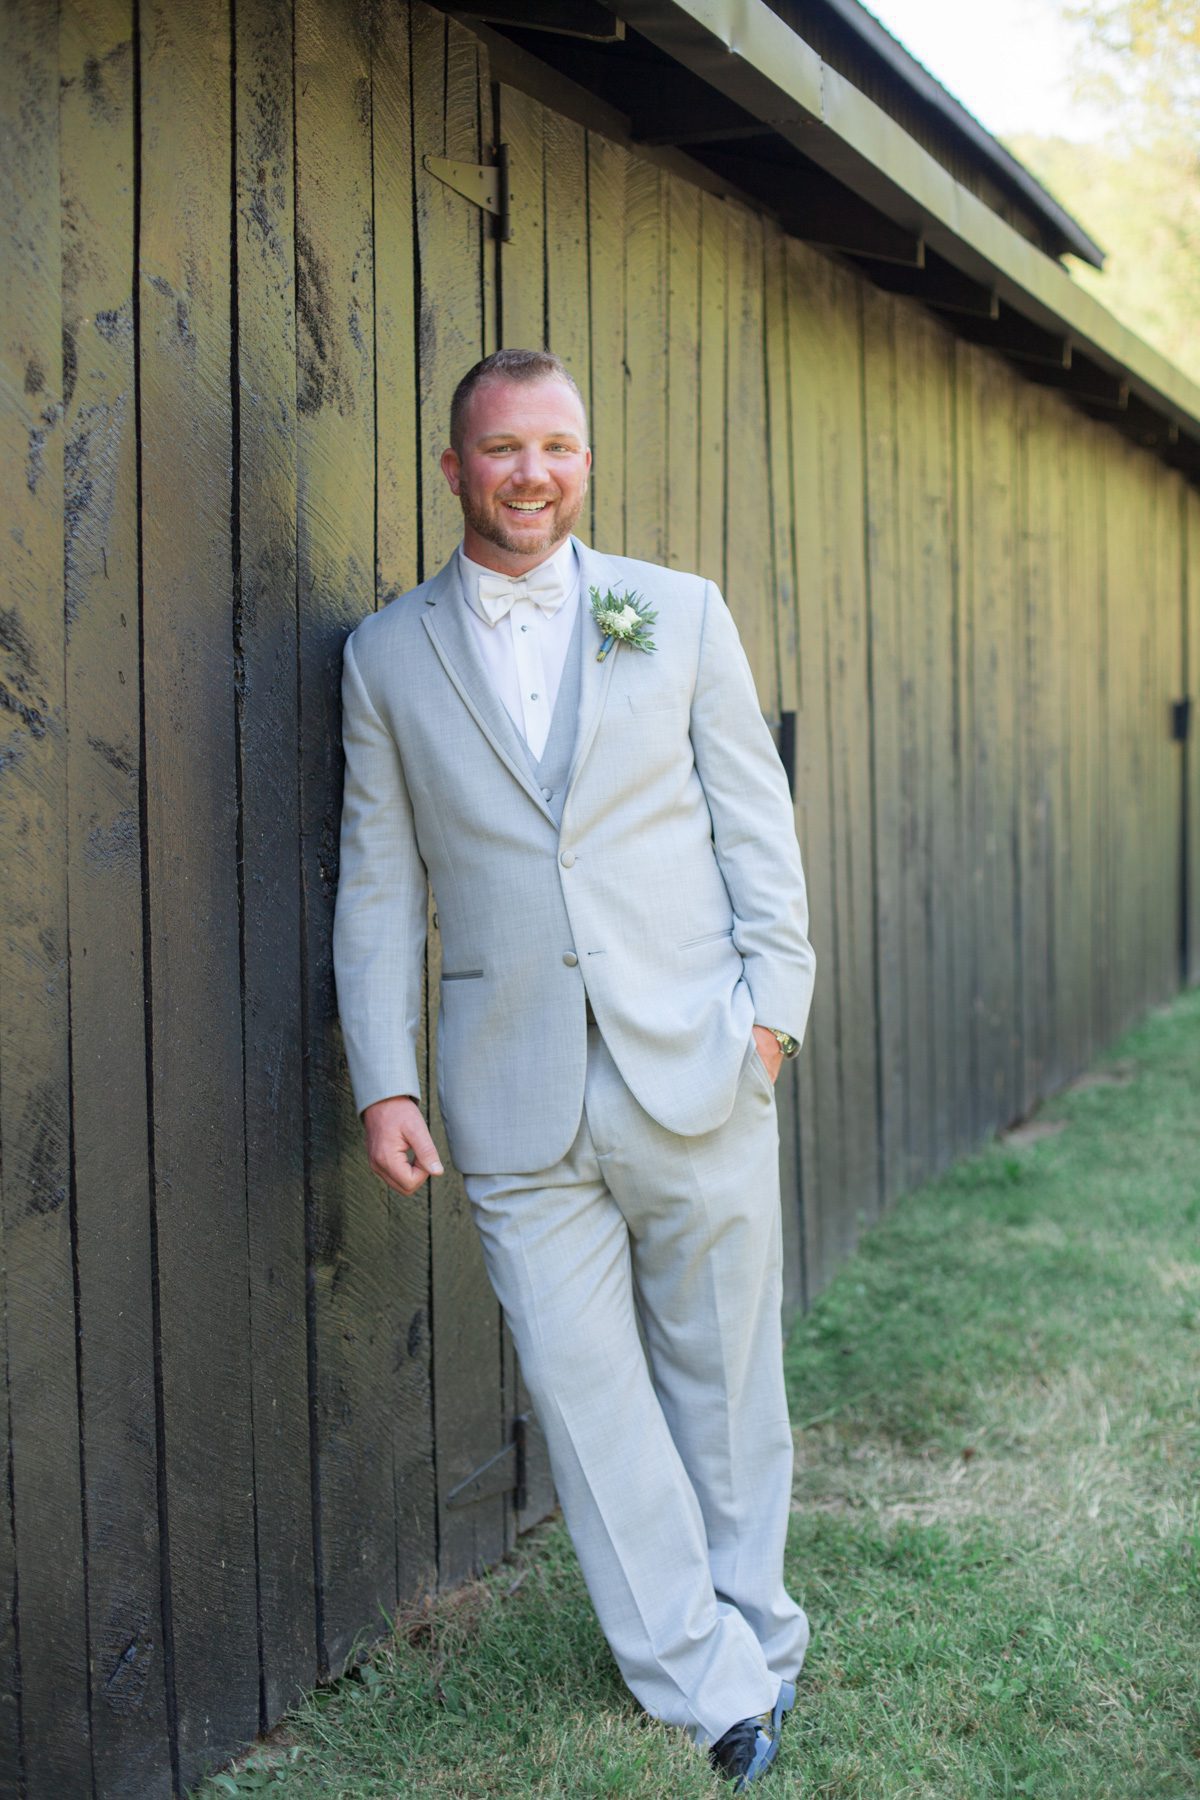 Photo of groom before wedding ceremony. Wedding photography at Cedarwood Weddings and Estate in Nashville, TN photography by Krista Lee Photography